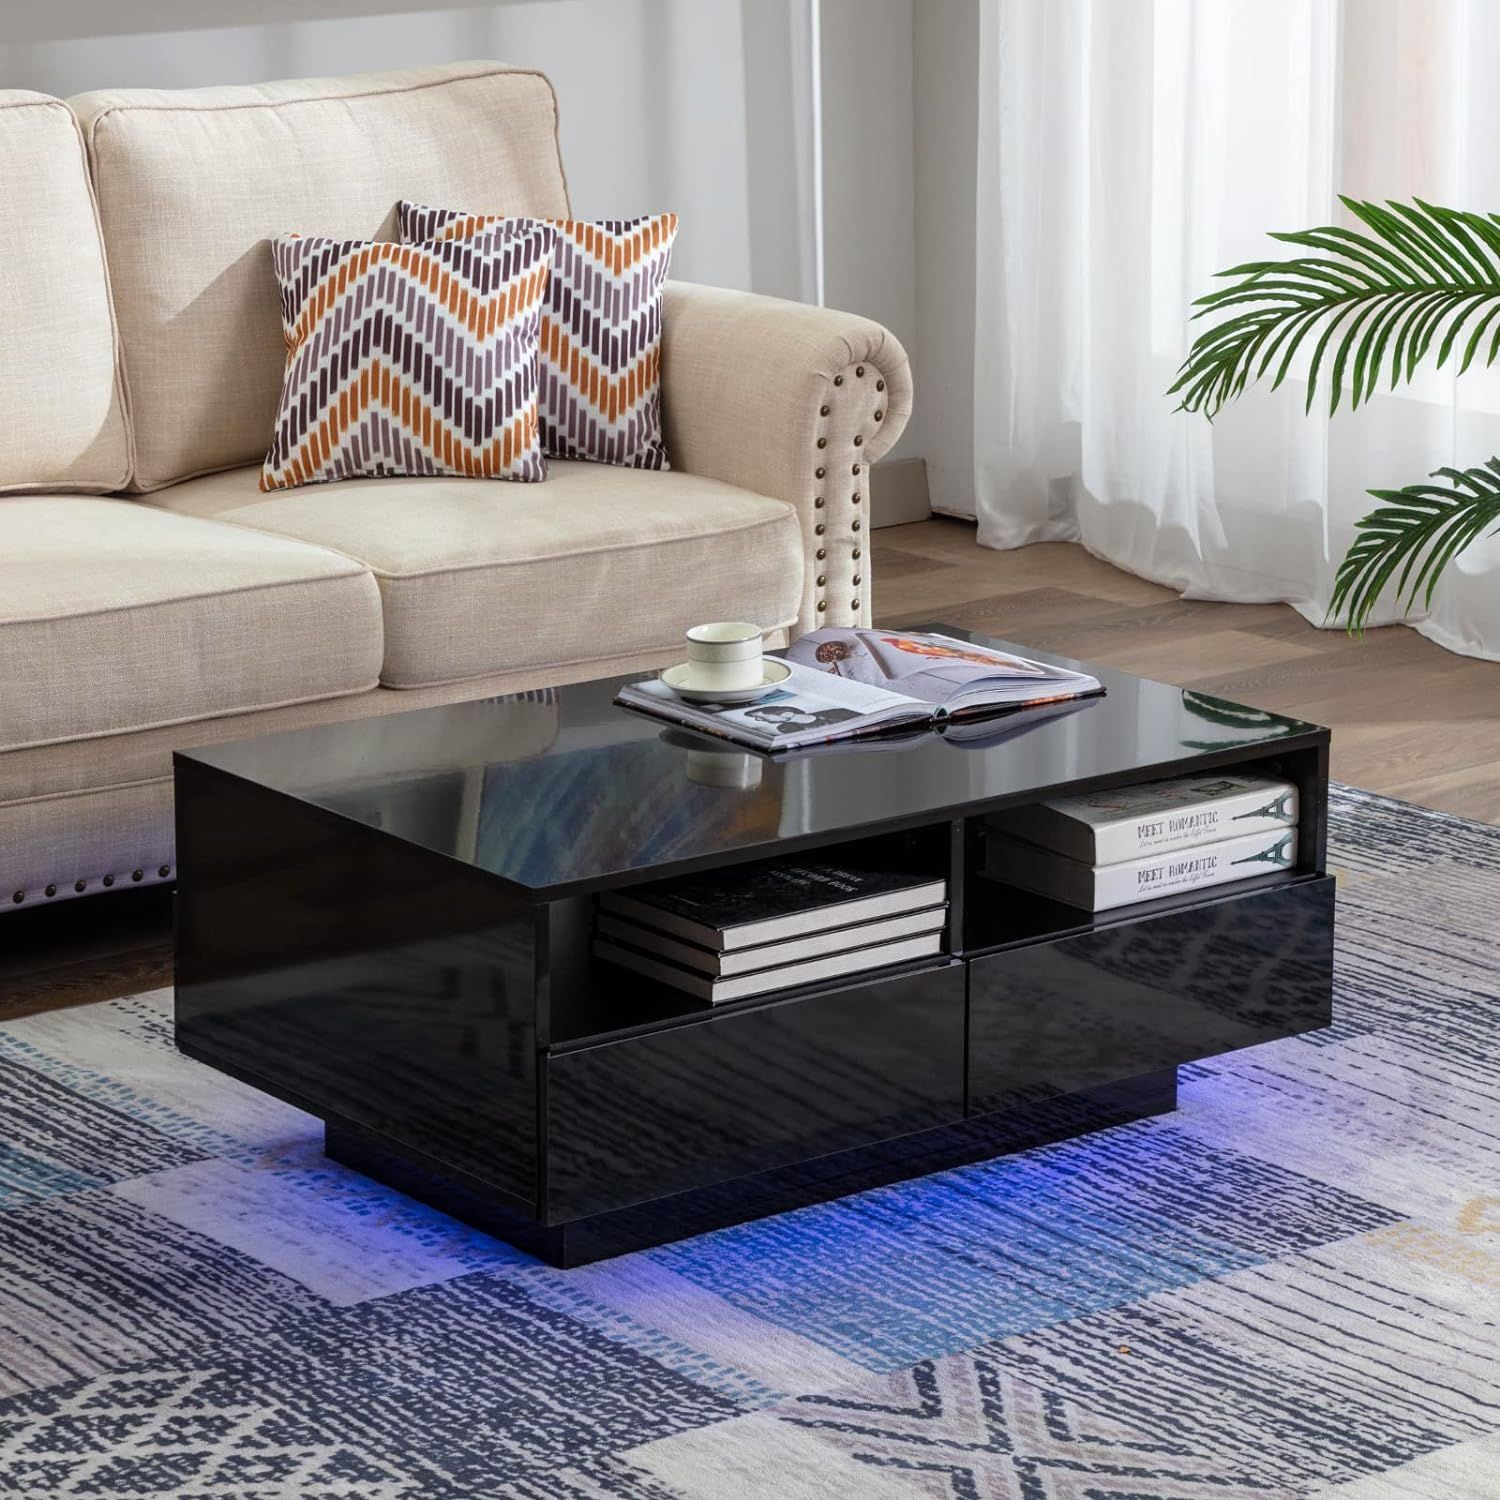 Buy Vastair Led Coffee Table For Living Room – Modern High Gloss Coffee With Regard To Led Coffee Tables With 4 Drawers (Gallery 3 of 20)